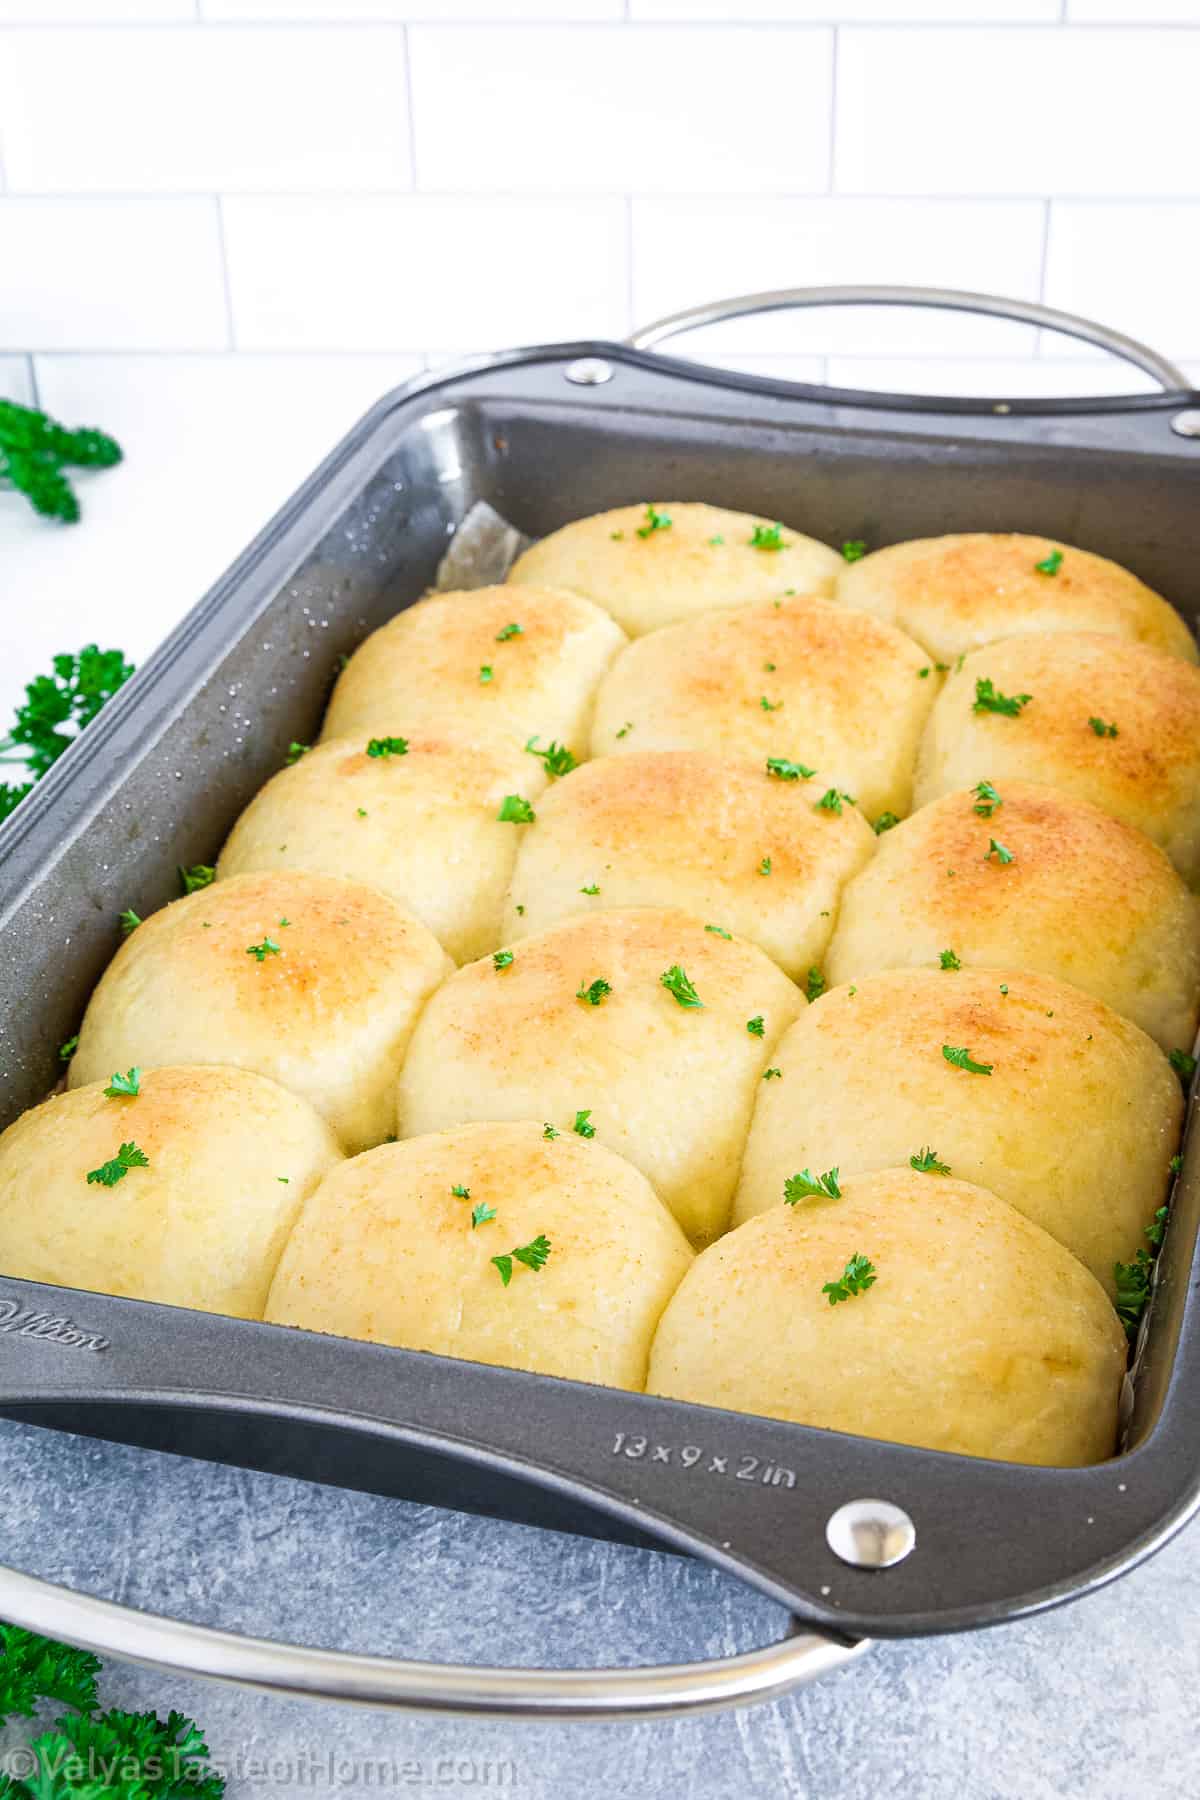 These garlic dinner rolls are a versatile dish that combines the comforting taste of bread with the savory flavor of garlic and you’re going to absolutely love them!